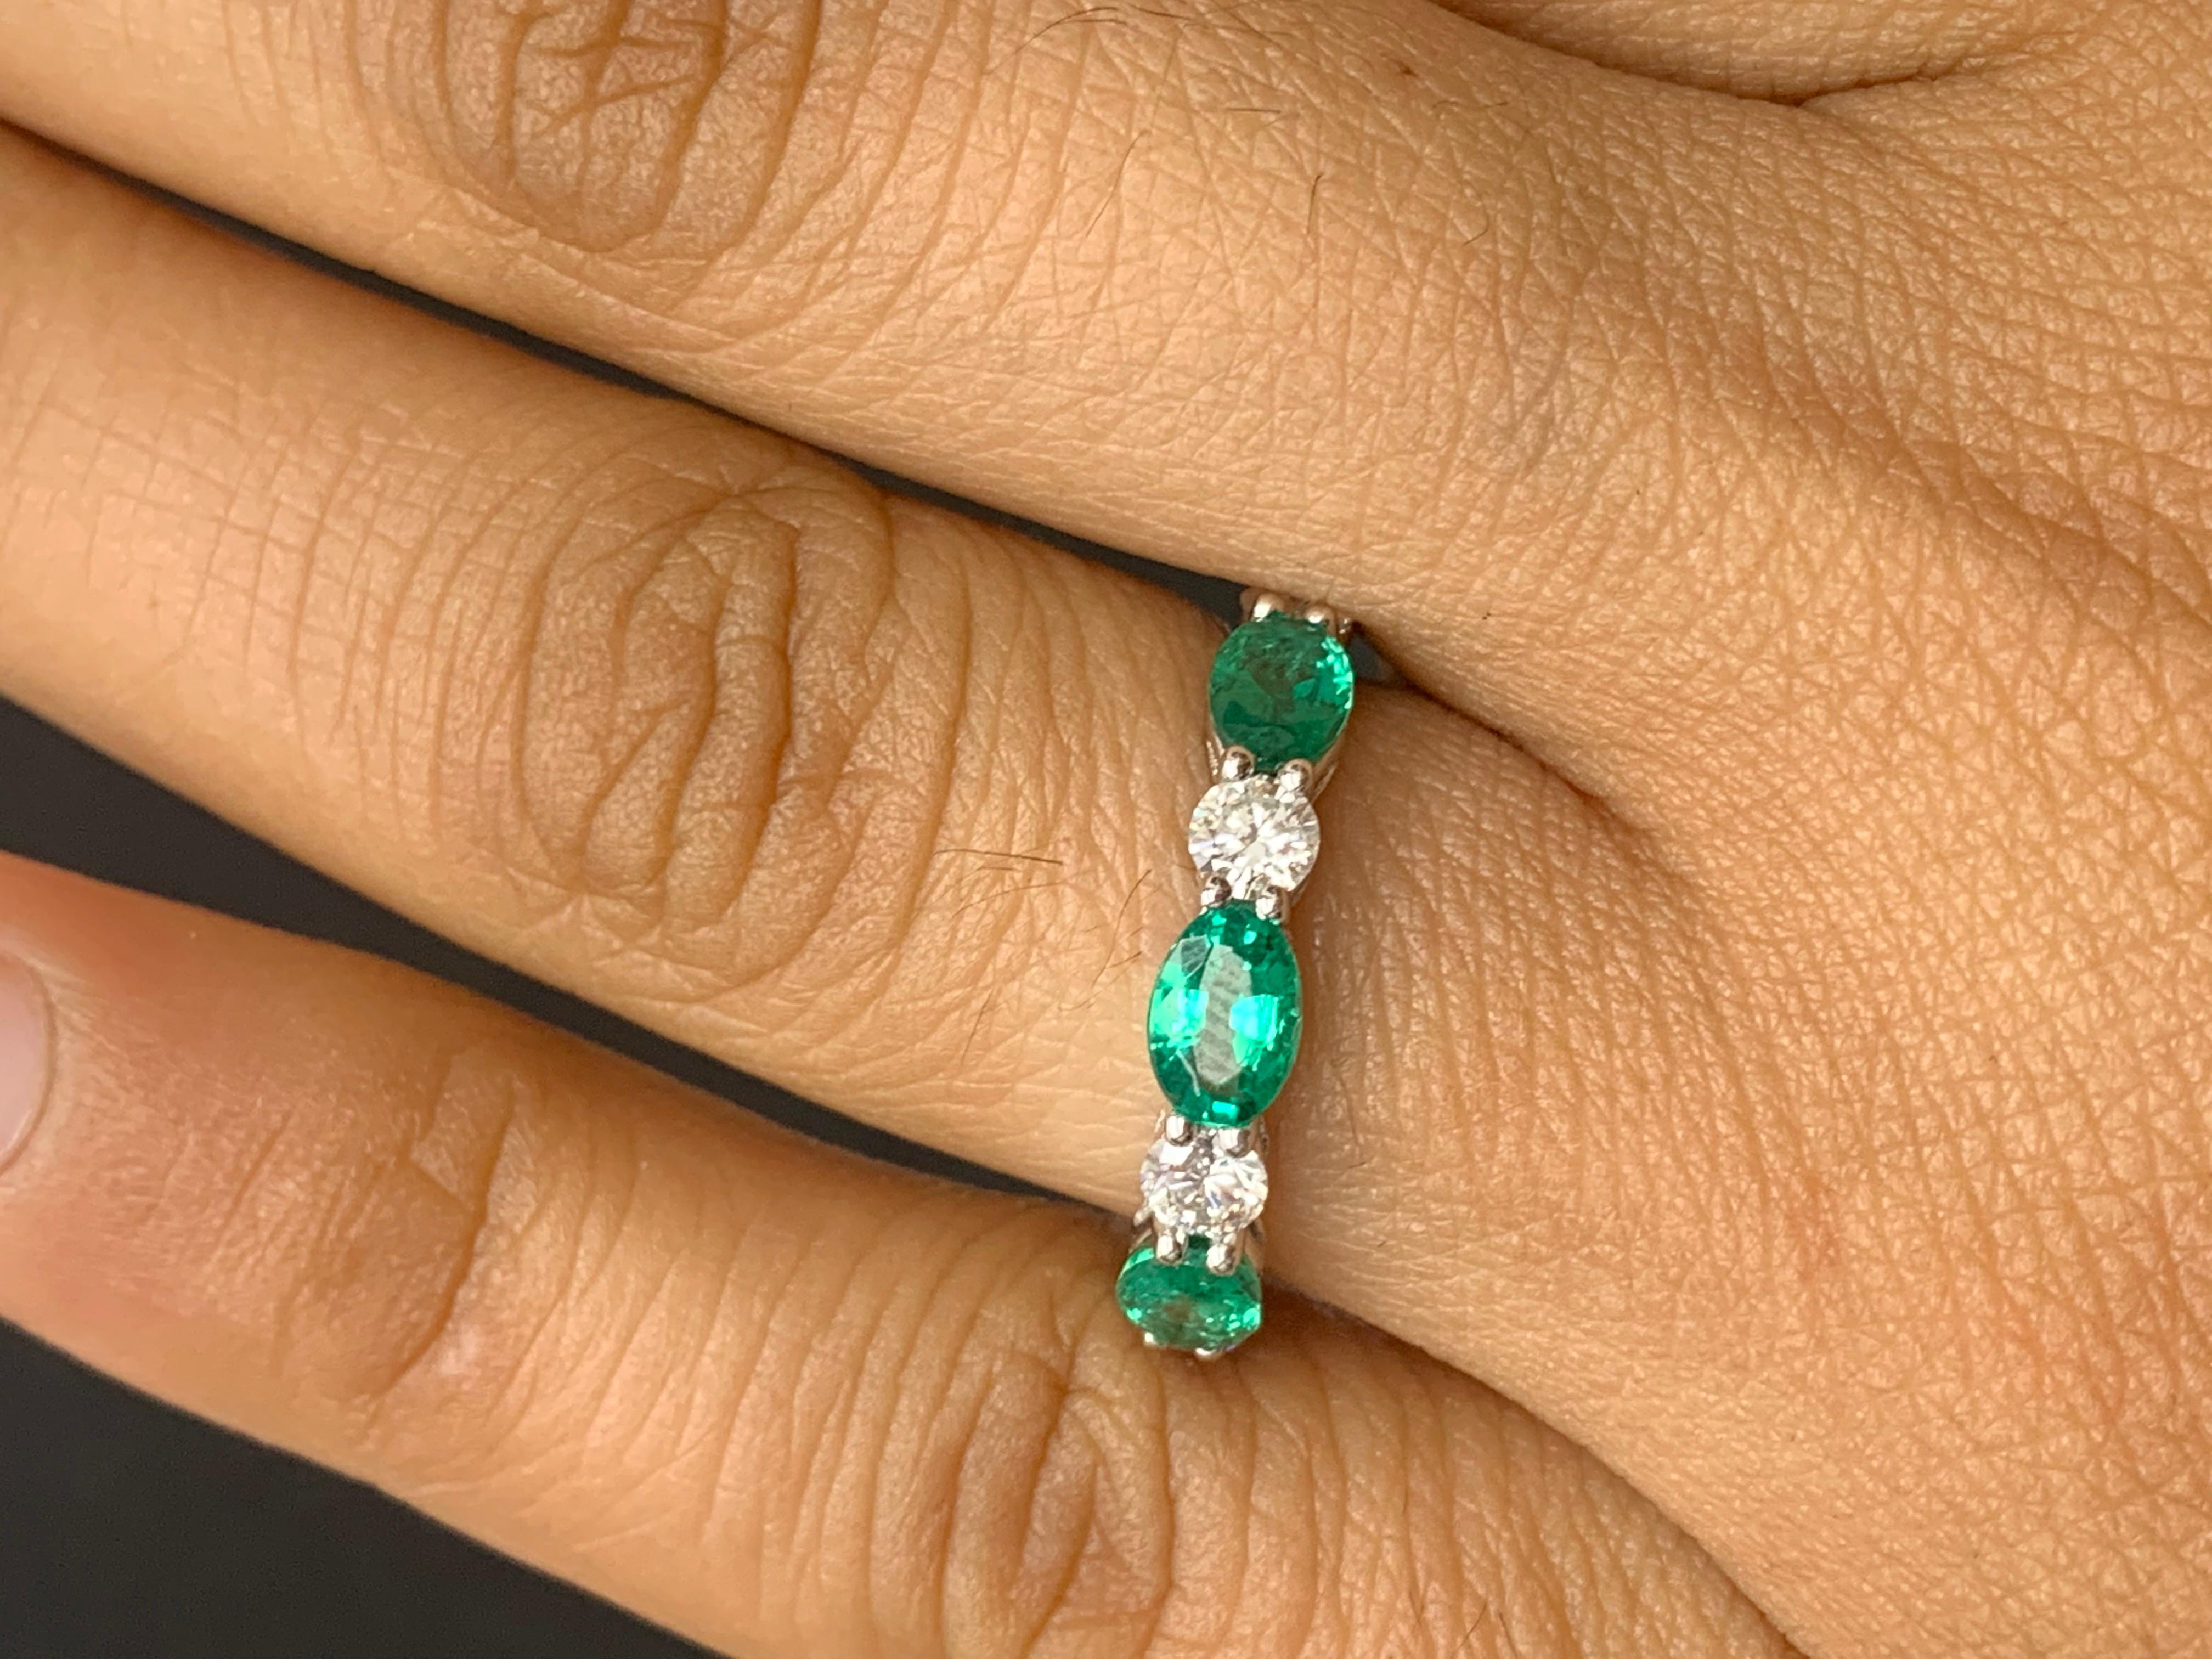 Handcrafted to perfection; showcasing color-rich oval cut emeralds that elegantly alternate round diamonds in a 14k white gold setting. 
The 3 emeralds weigh 1.27 carats total and 4 diamonds weigh 0.61 carats total.

Size 6.5 US (Sizable). One of a